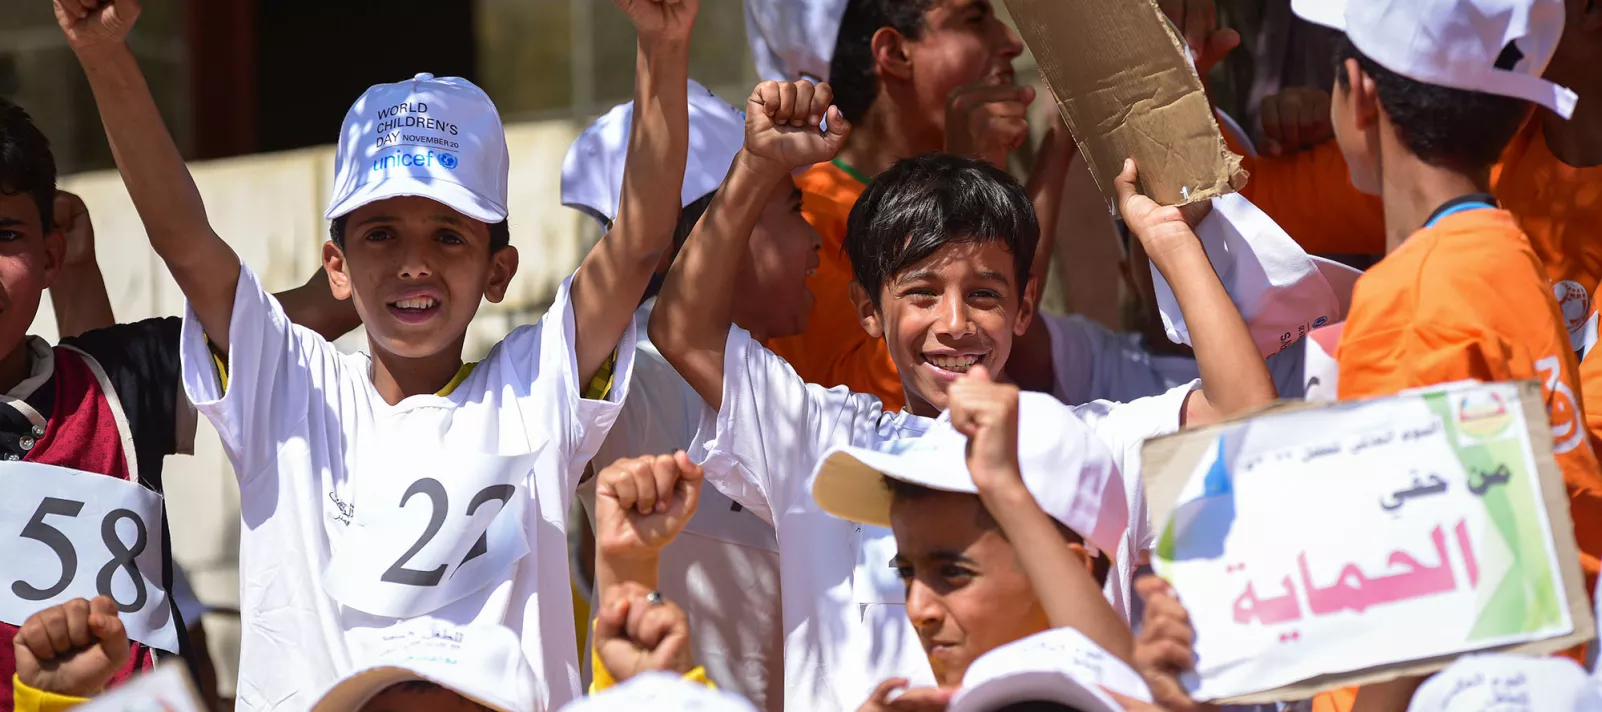 Students participate on the World Children’s Day event in Yemen